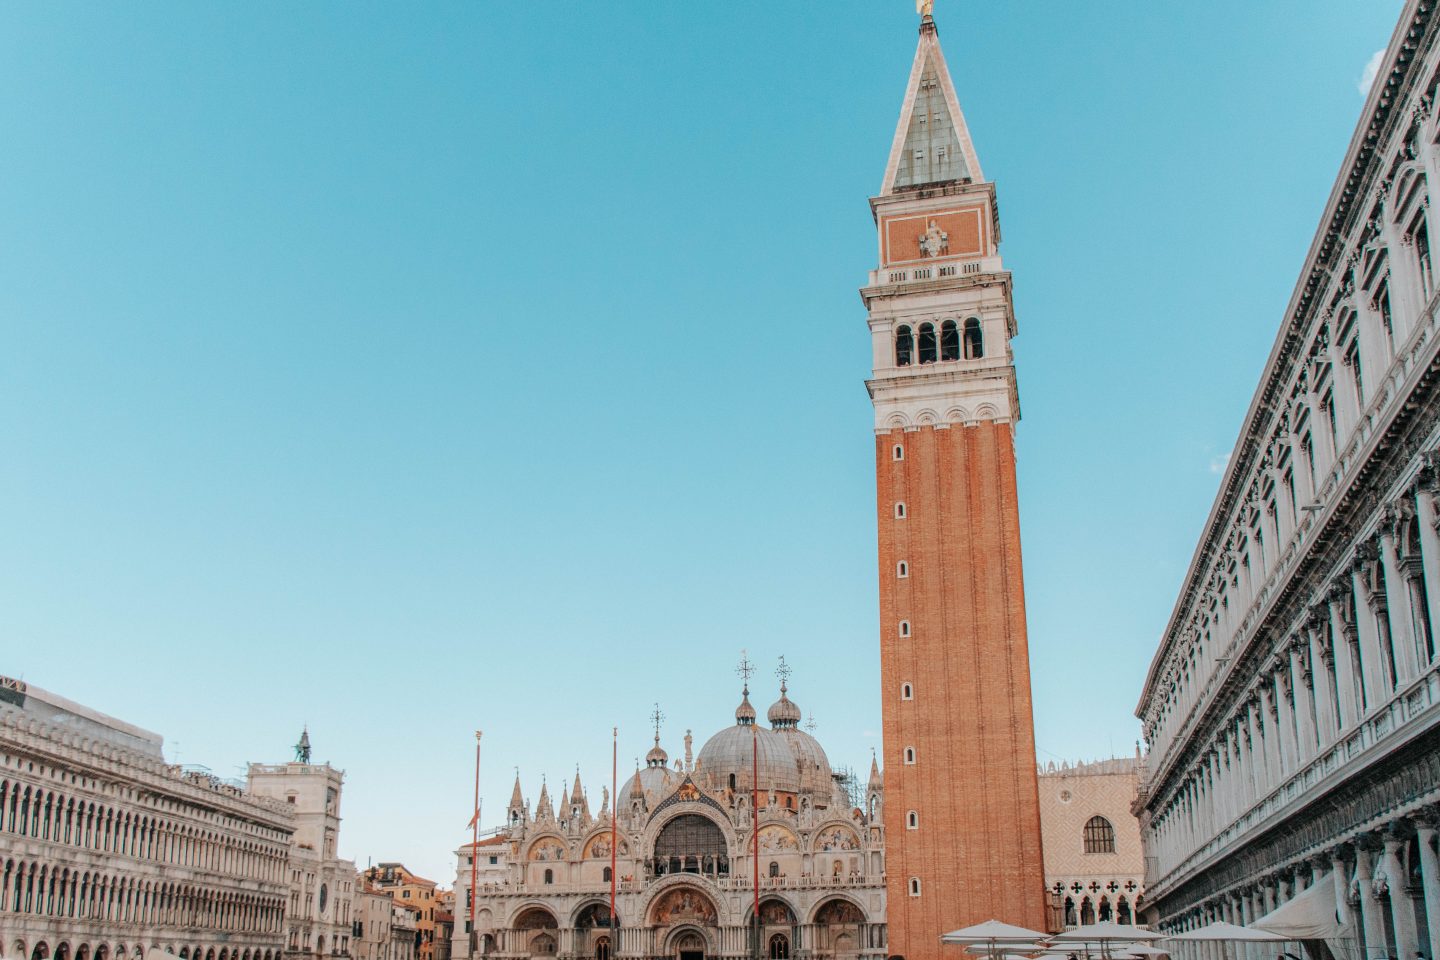 Basilica di San Marco and St. Mark's Bell Tower in Venice